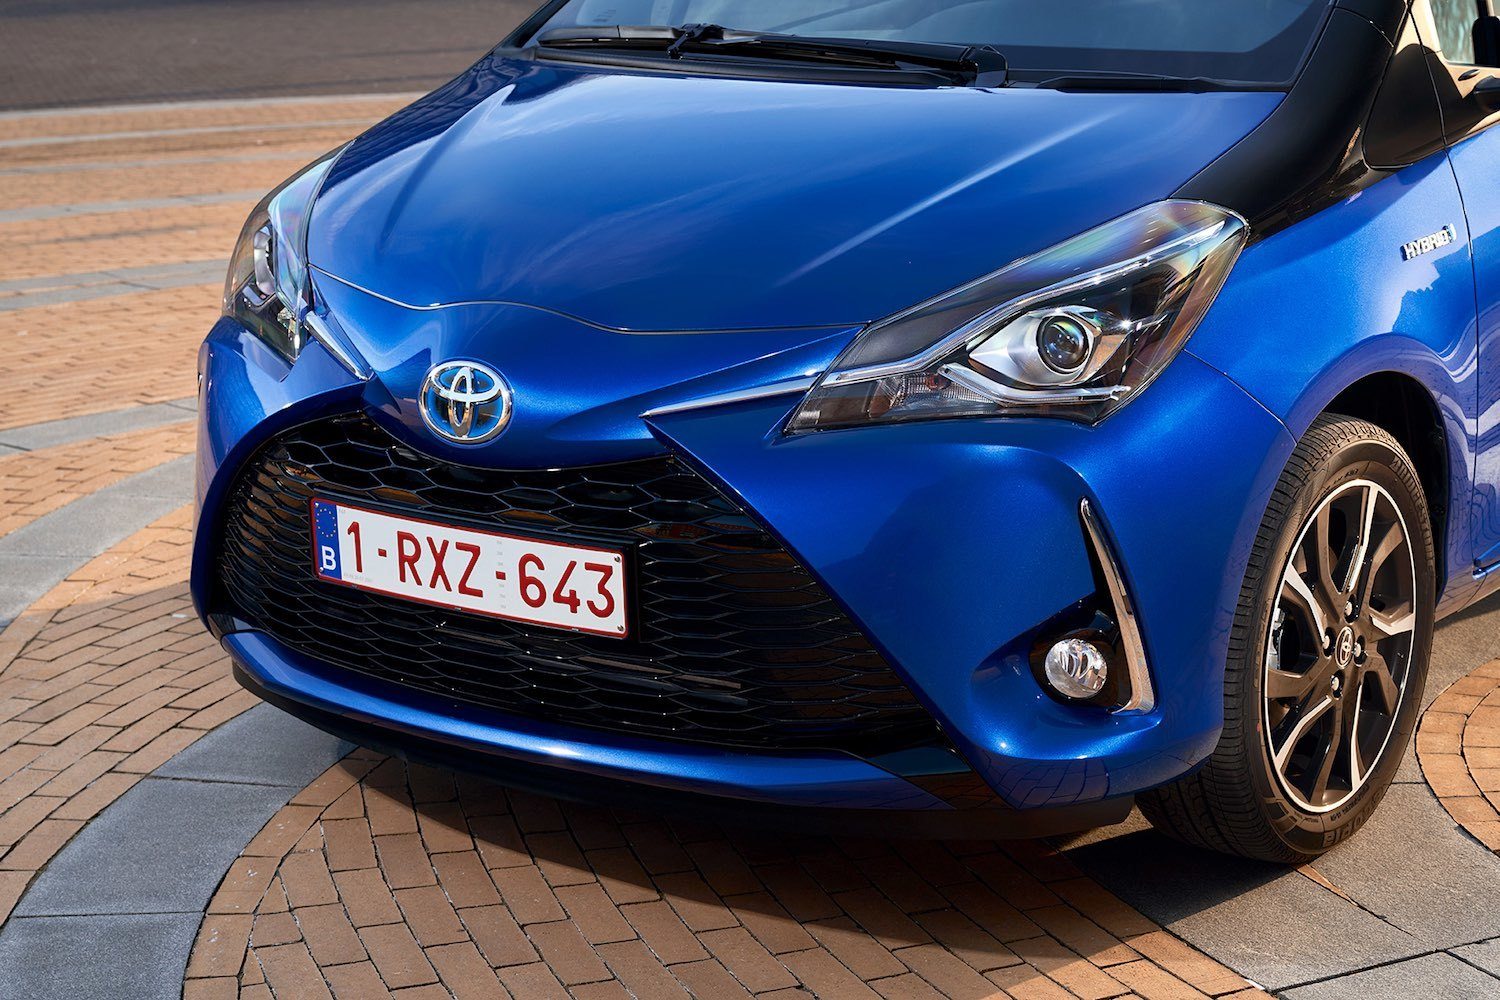 Tim Barnes-Clay drives the New Toyota Yaris car review by Drive 1